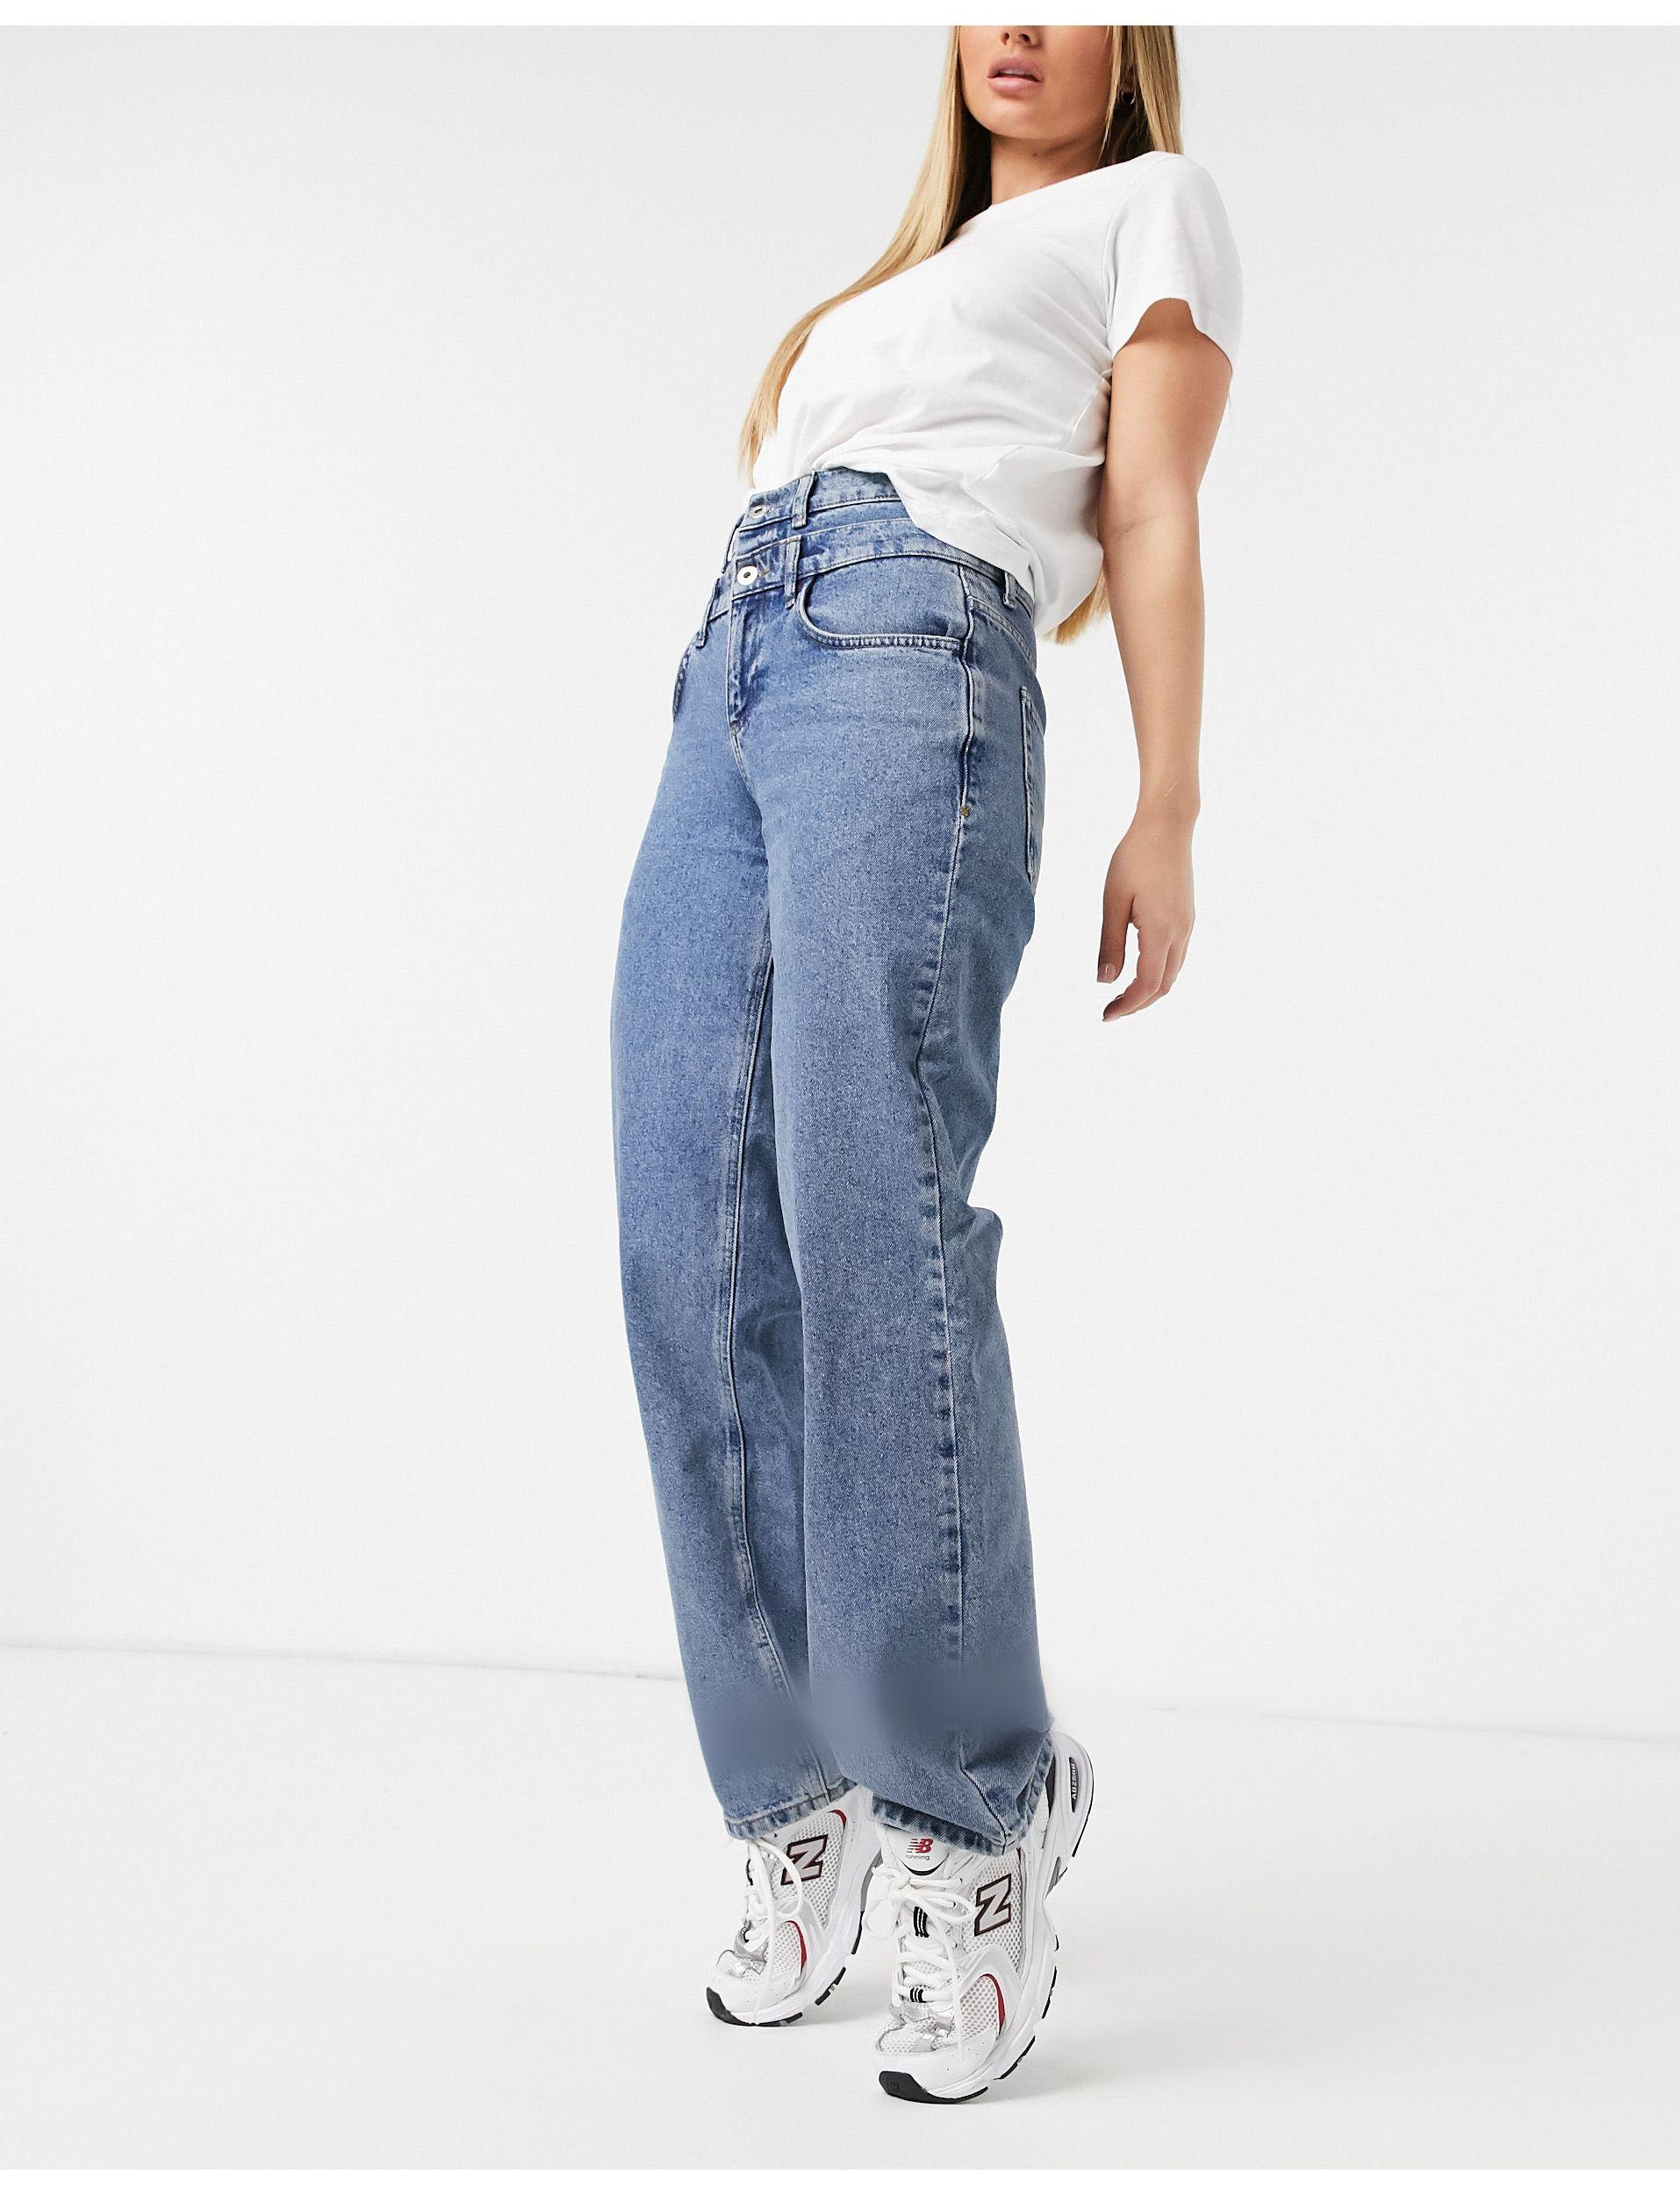 COLLUSION x014 90s Baggy Dad Jeans with Stepped Waist band-Blues